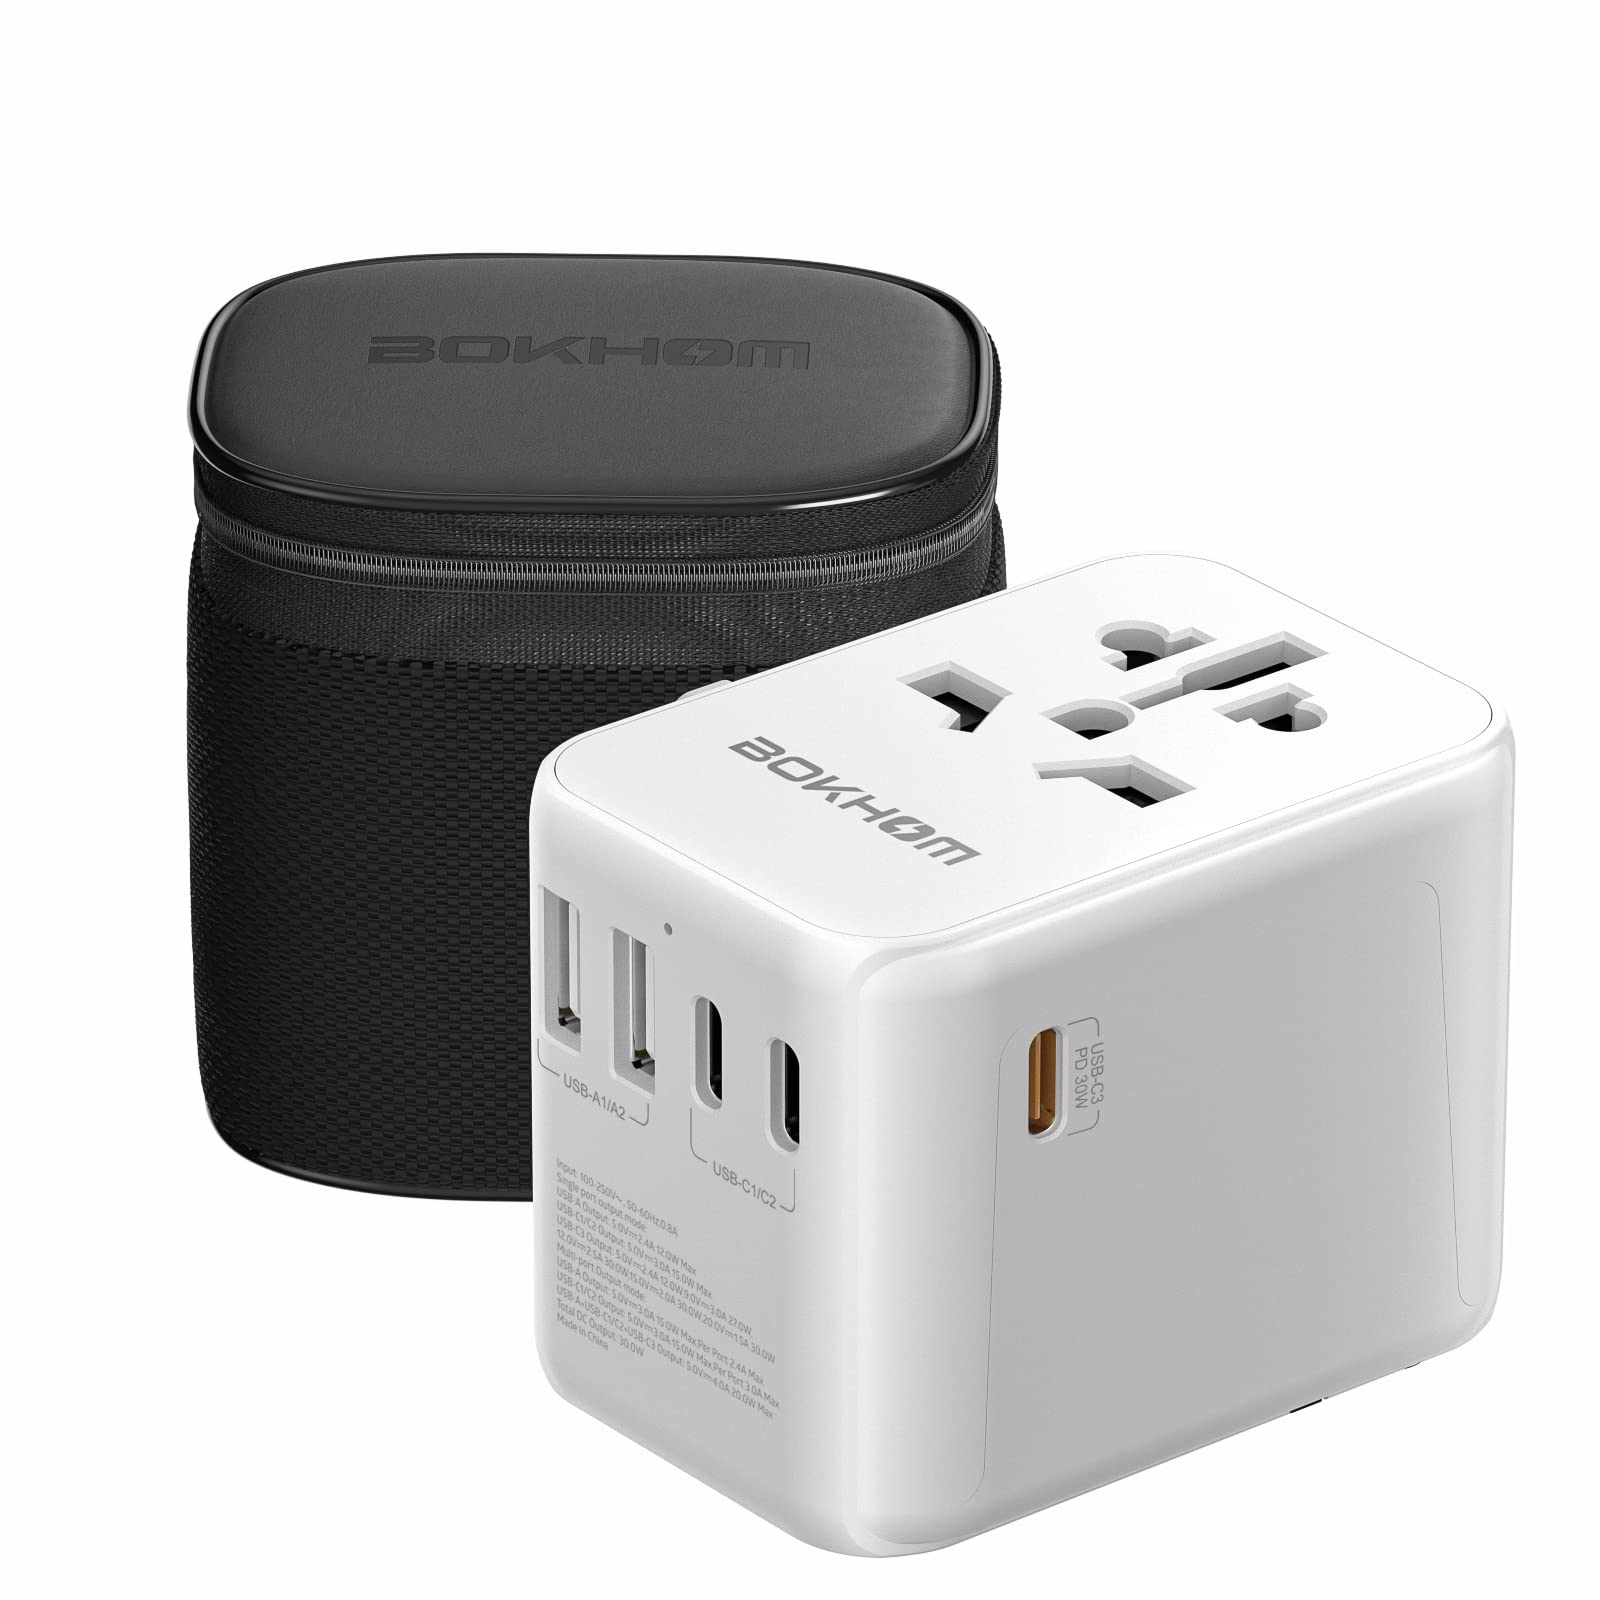 Worldwide Travel Adapter with USB C PD 30W Fast Charging , Travel Plug Adapter (3 USB C 2 USB-A ) Universal Socket Dual 10A Fuses Surge Protection All In One International Adapter - EU UK US AU Plugs